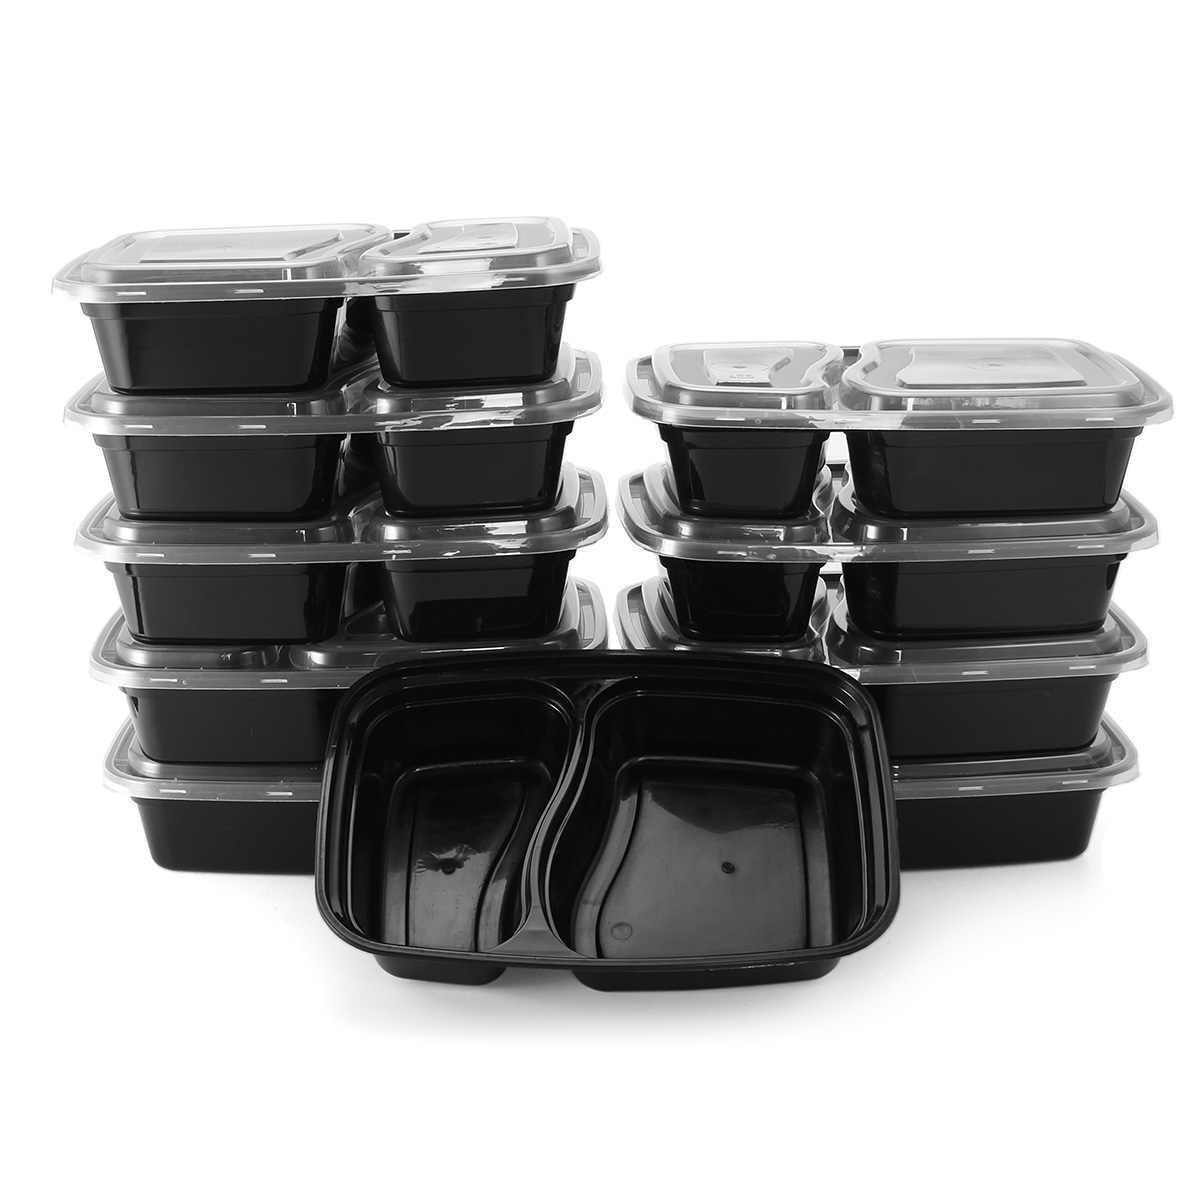 

10Pcs Meal Prep Containers Plastic Kitchen Food Storage Reusable Microwavable Lunch Box